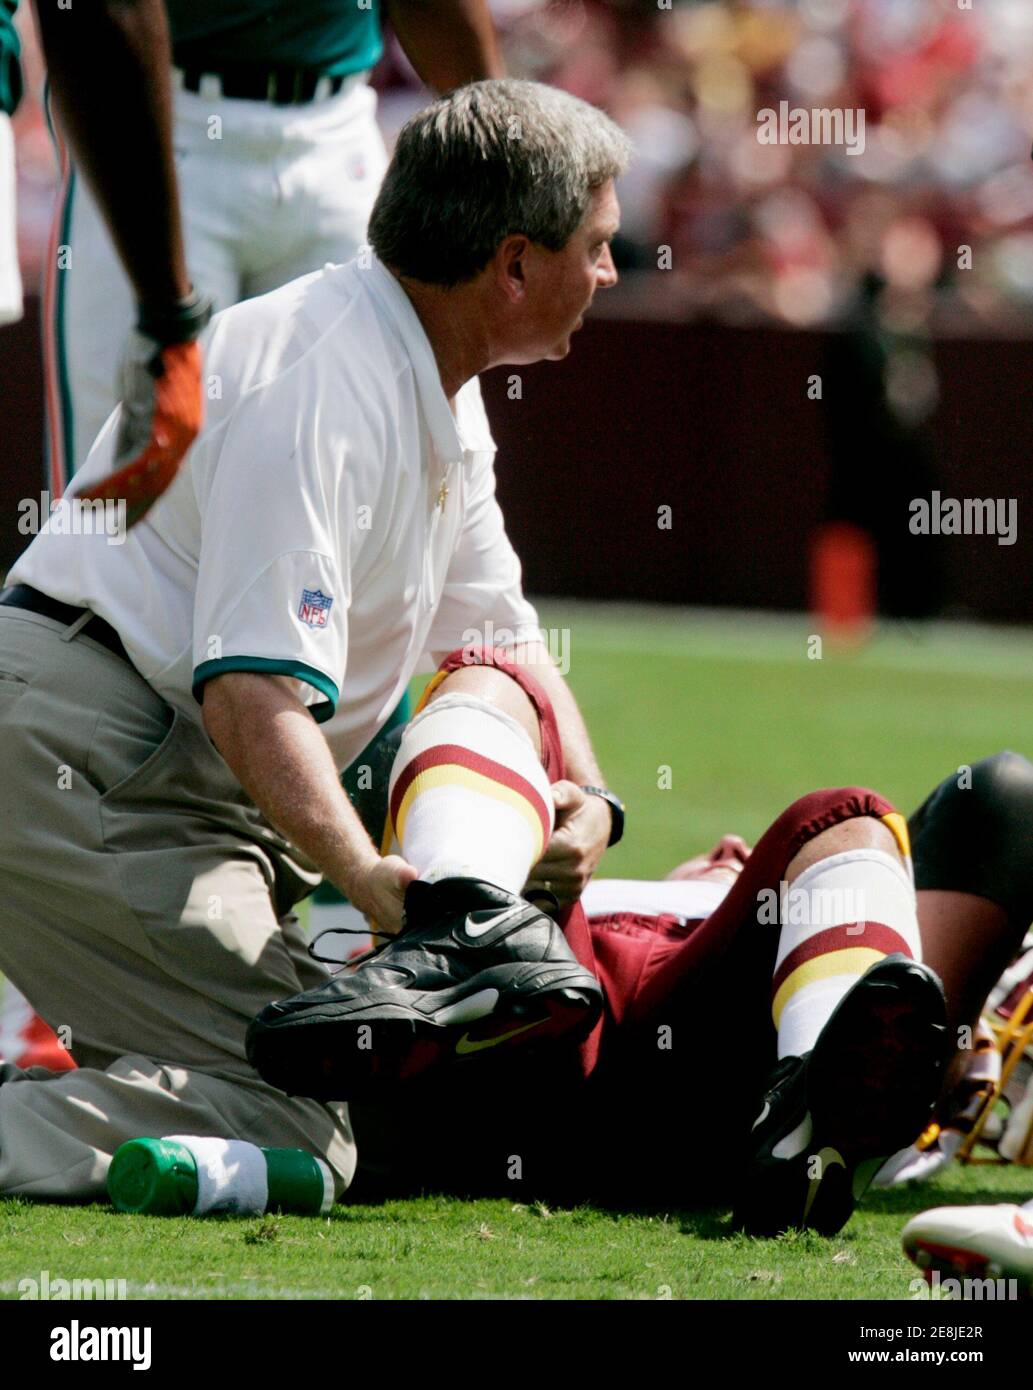 An unidentified member of the Washington Redskins medical team (L) looks at the severe ankle injury of Redskins' offensive tackle Jon Jansen in the first half of their NFL football game against the Miami Dolphins in Landover, Maryland September 9, 2007. Jansen left the game with the injury.   REUTERS/Gary Cameron  (UNITED STATES) Stock Photo